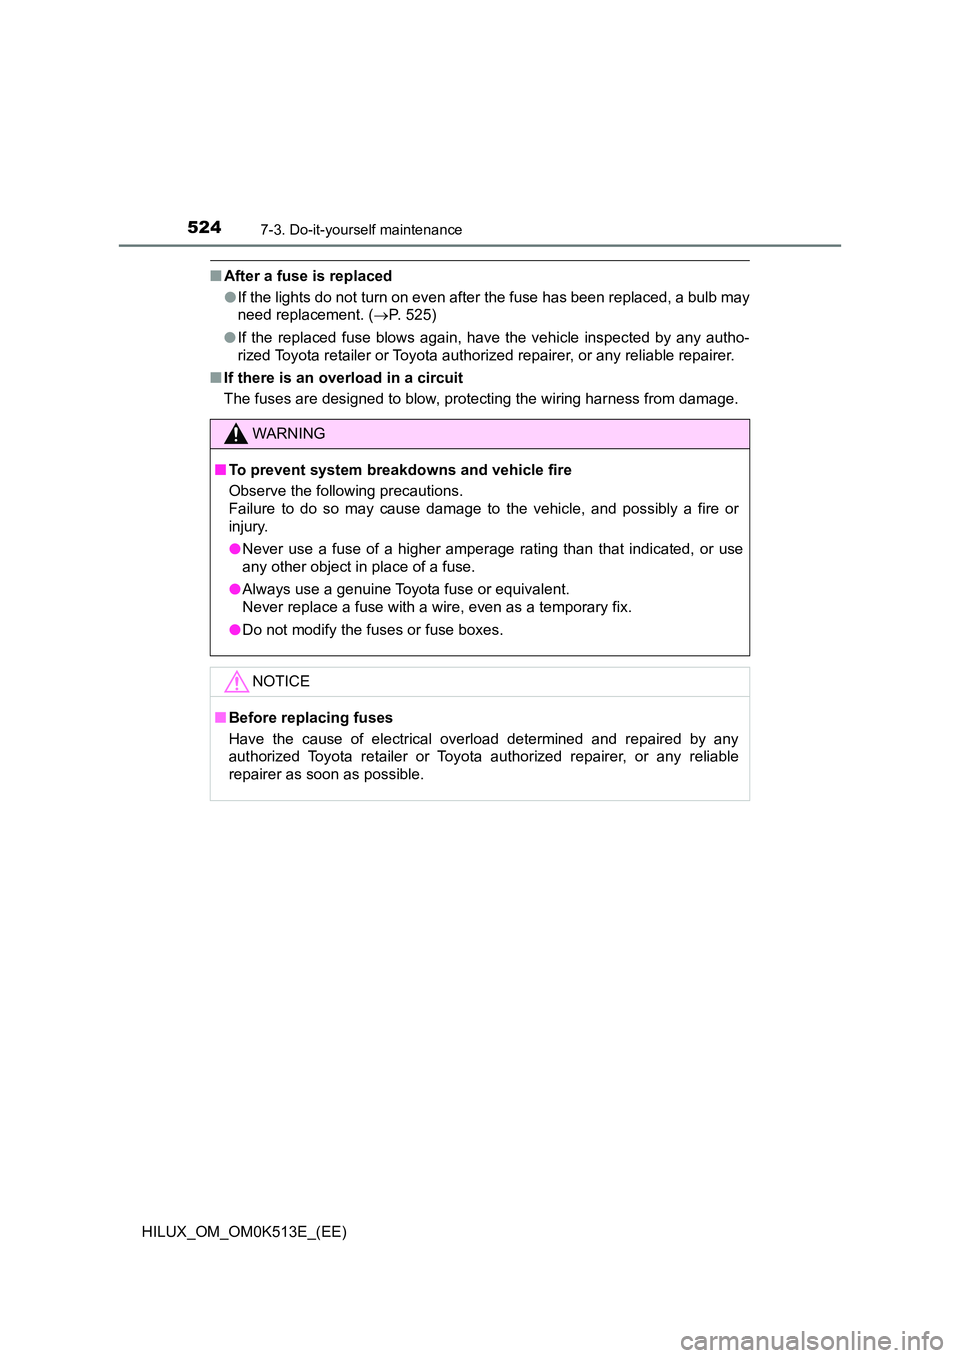 TOYOTA HILUX 2021  Owners Manual (in English) 5247-3. Do-it-yourself maintenance
HILUX_OM_OM0K513E_(EE)
�QAfter a fuse is replaced 
�O If the lights do not turn on even after the fuse has been replaced, a bulb may 
need replacement. ( P. 525) 